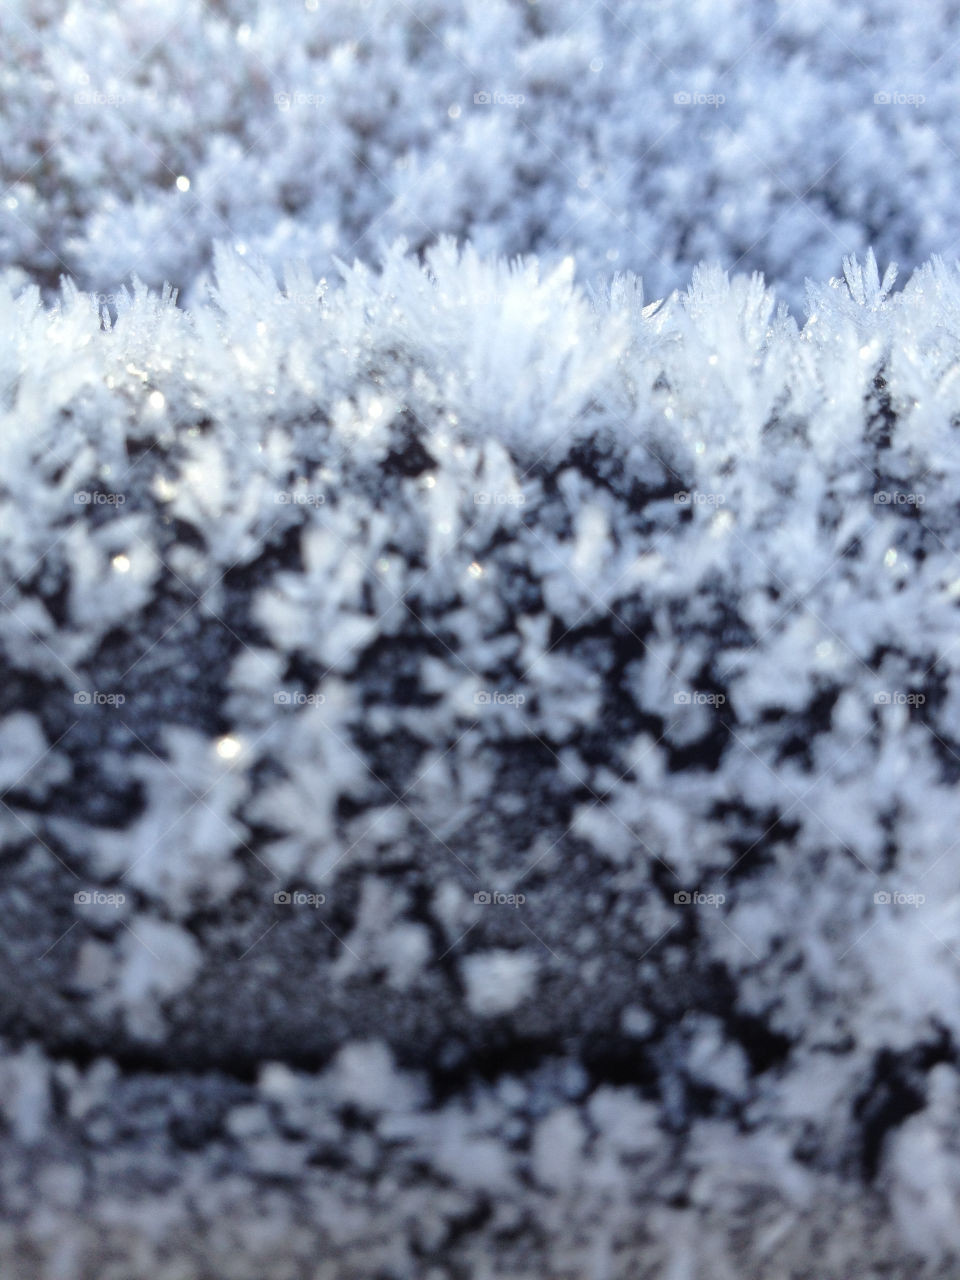 Ice crystals on roof of my car